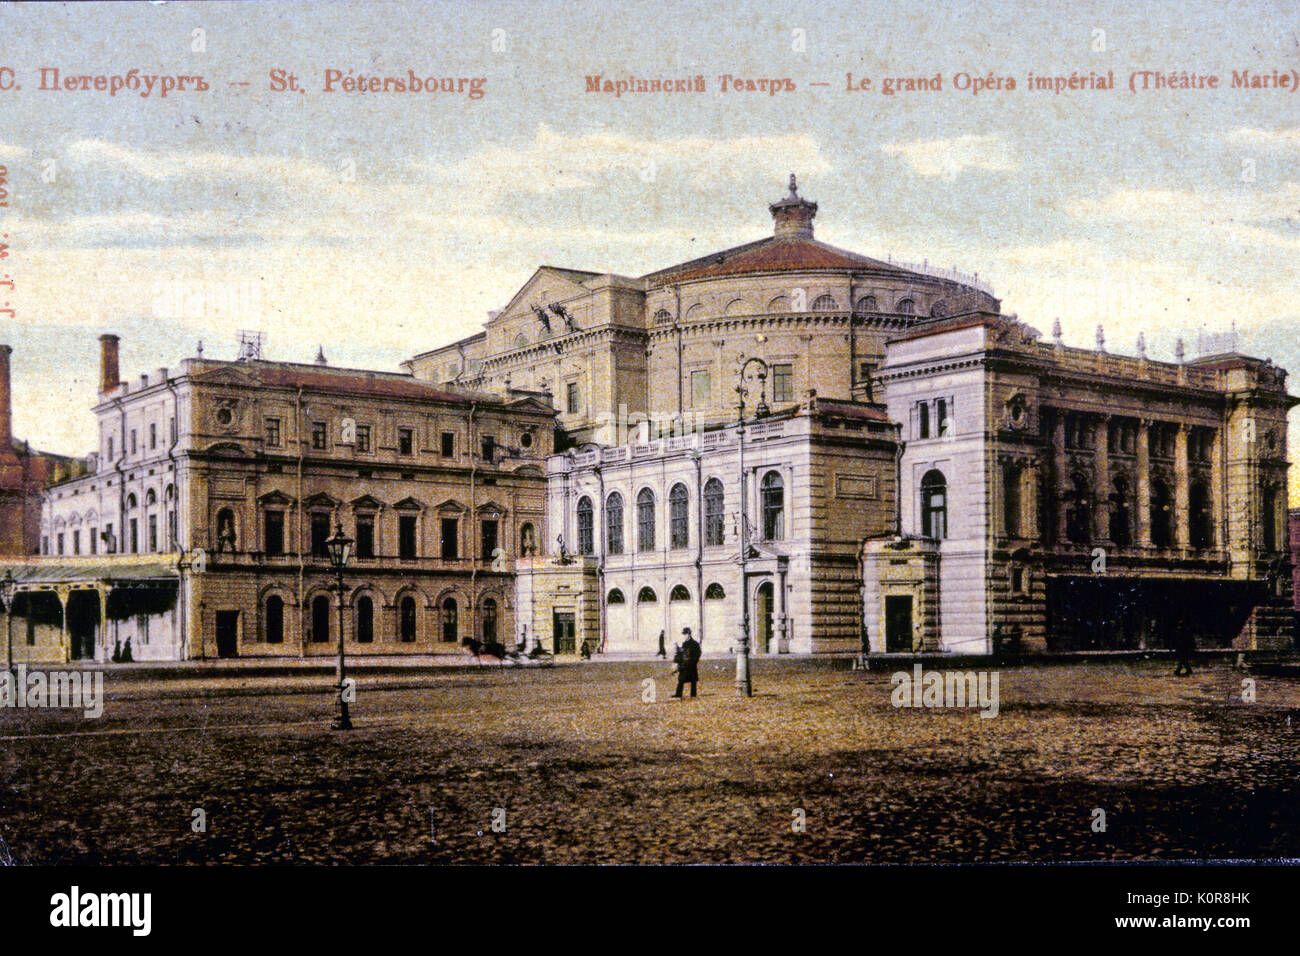 ST. PETERSBURG - Marinsky Theatre (Le Grand Opera Imperial)- late 19th  /early 20th centurypostcard Stock Photo